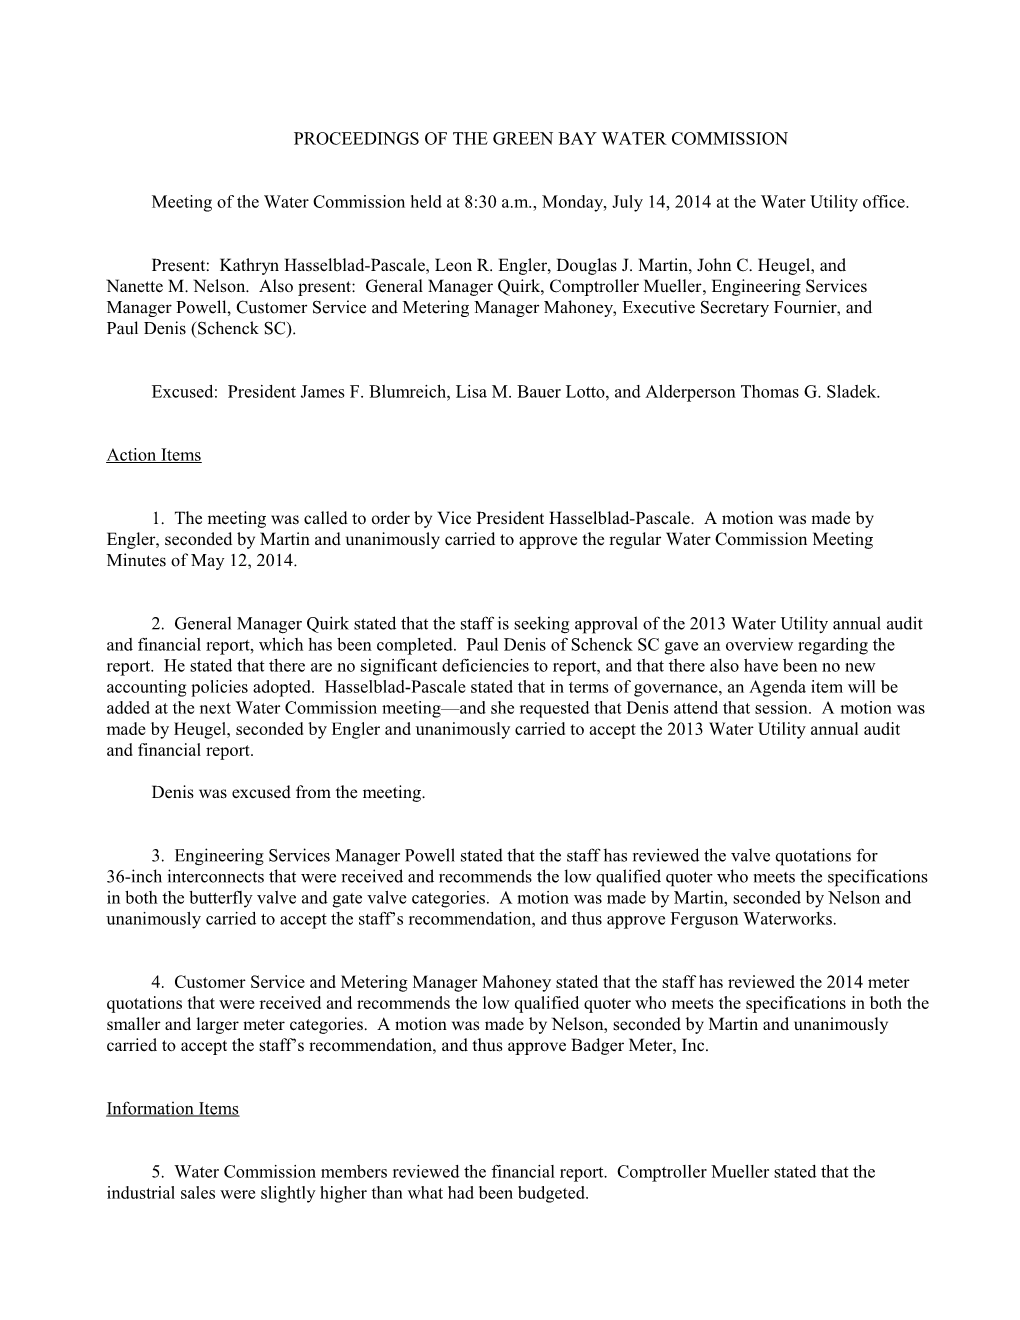 Proceedings of the Green Bay Water Commission